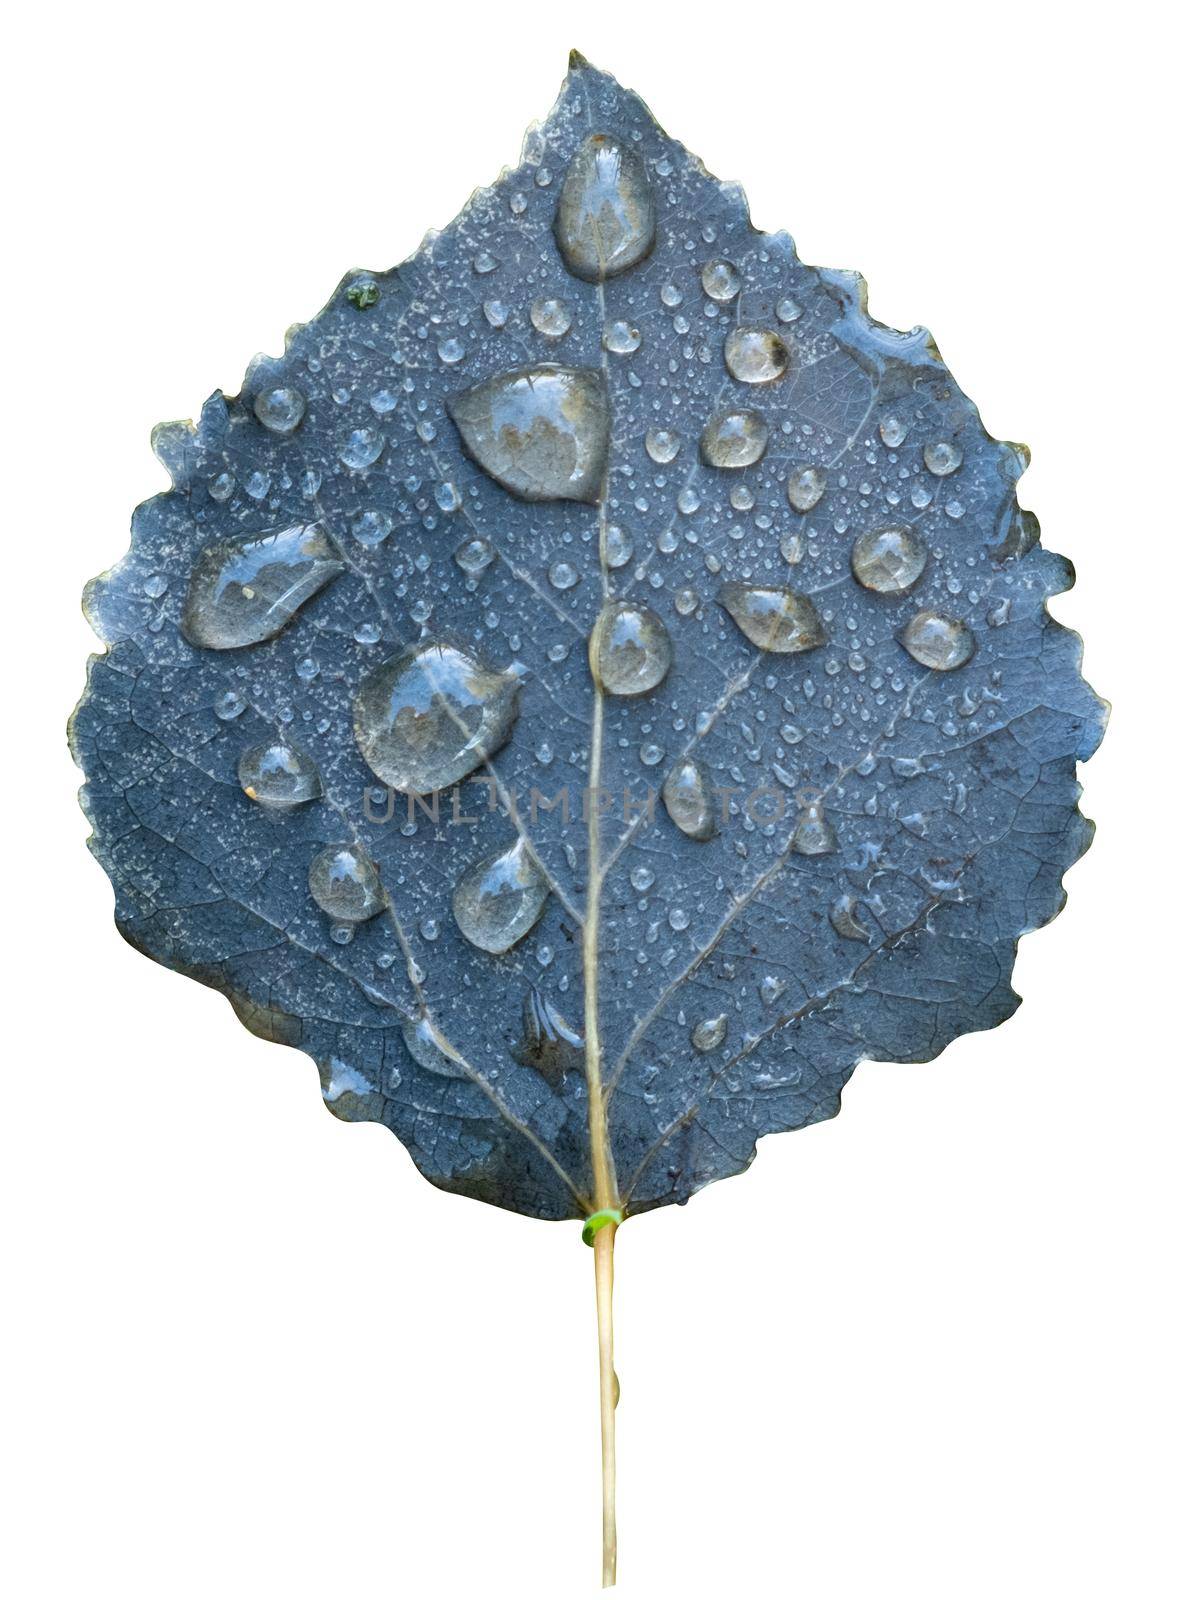 Isolated Leaf In Autumn With Water Droplets On A White Background